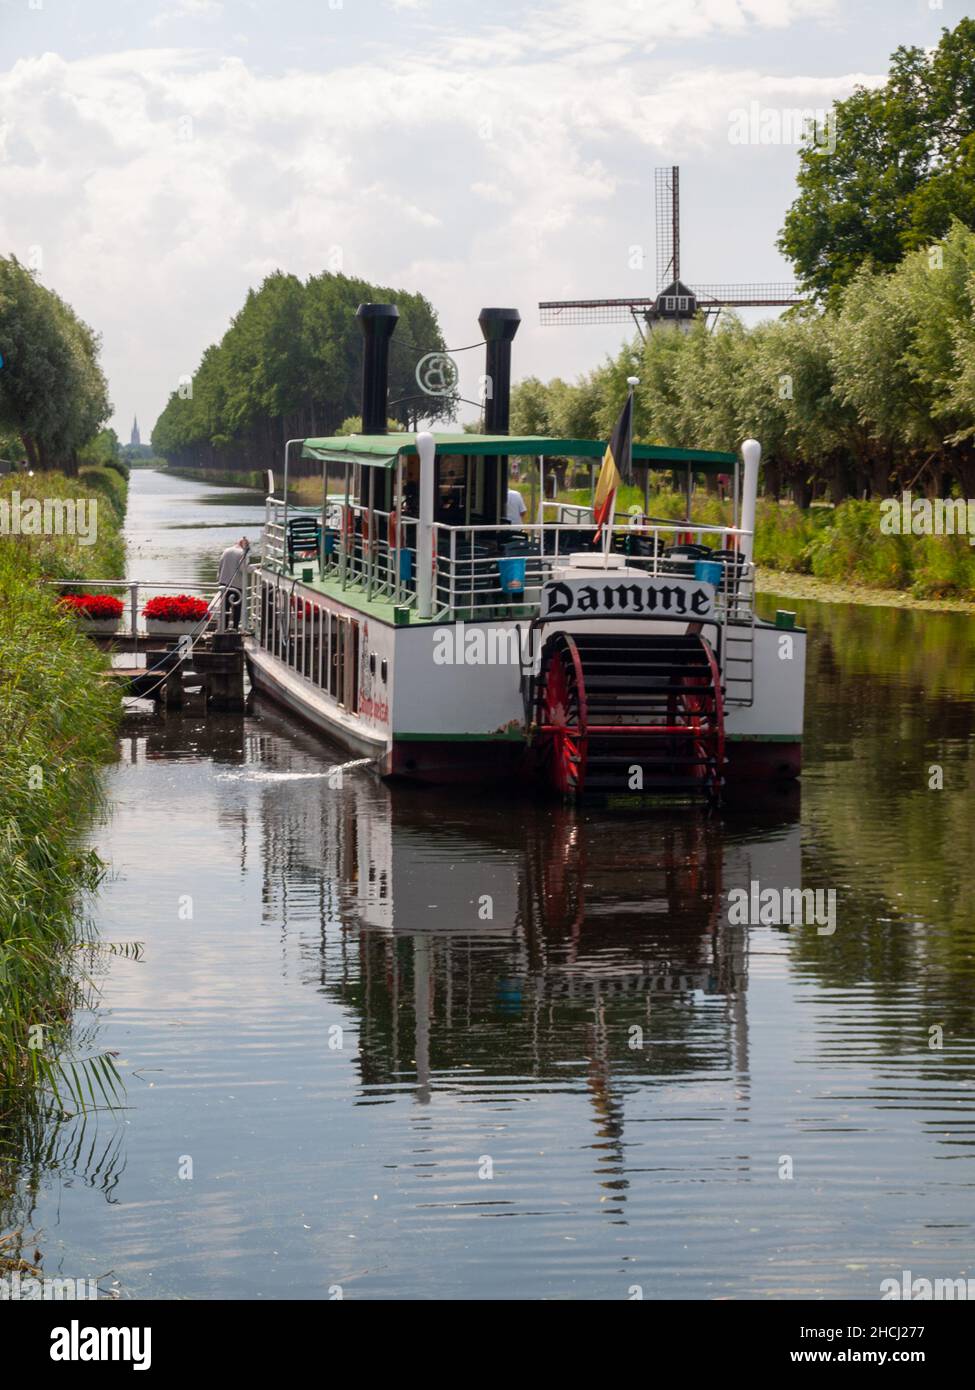 A tourist boat in Damme Canal Stock Photo